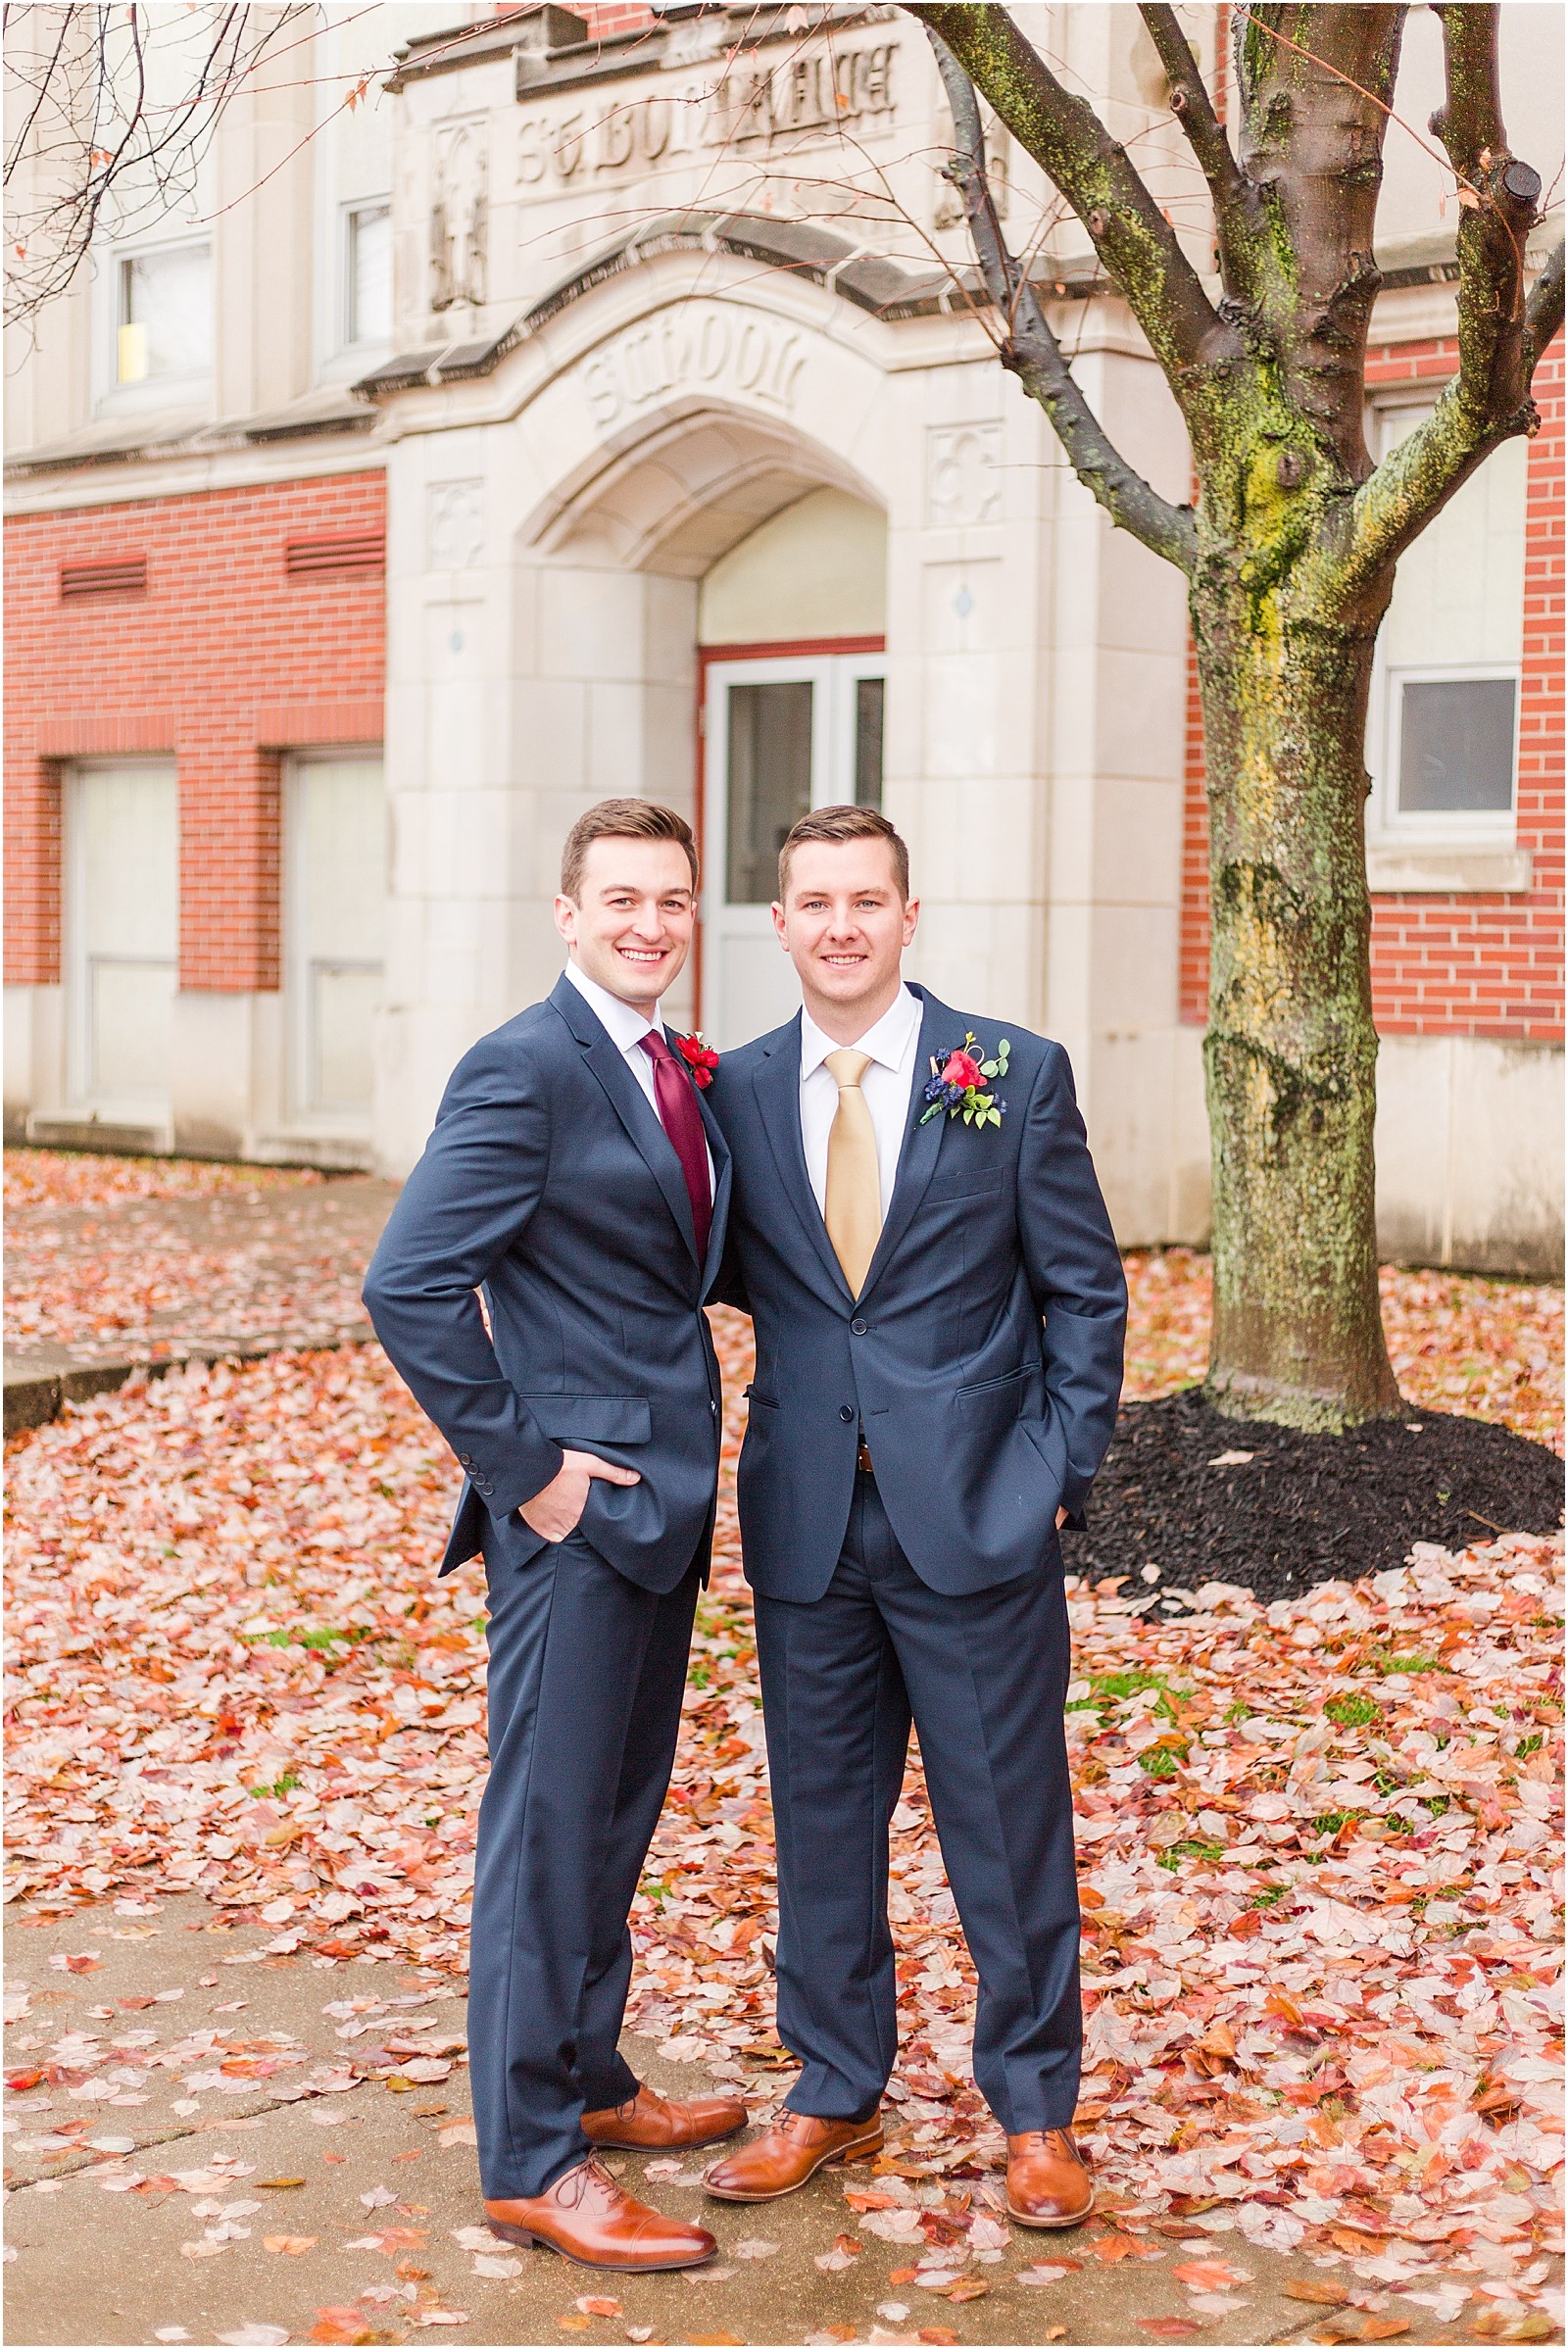 Haylee and Dillon's Evansville, Indiana wedding by Bret and Brandie Photography.0035.jpg